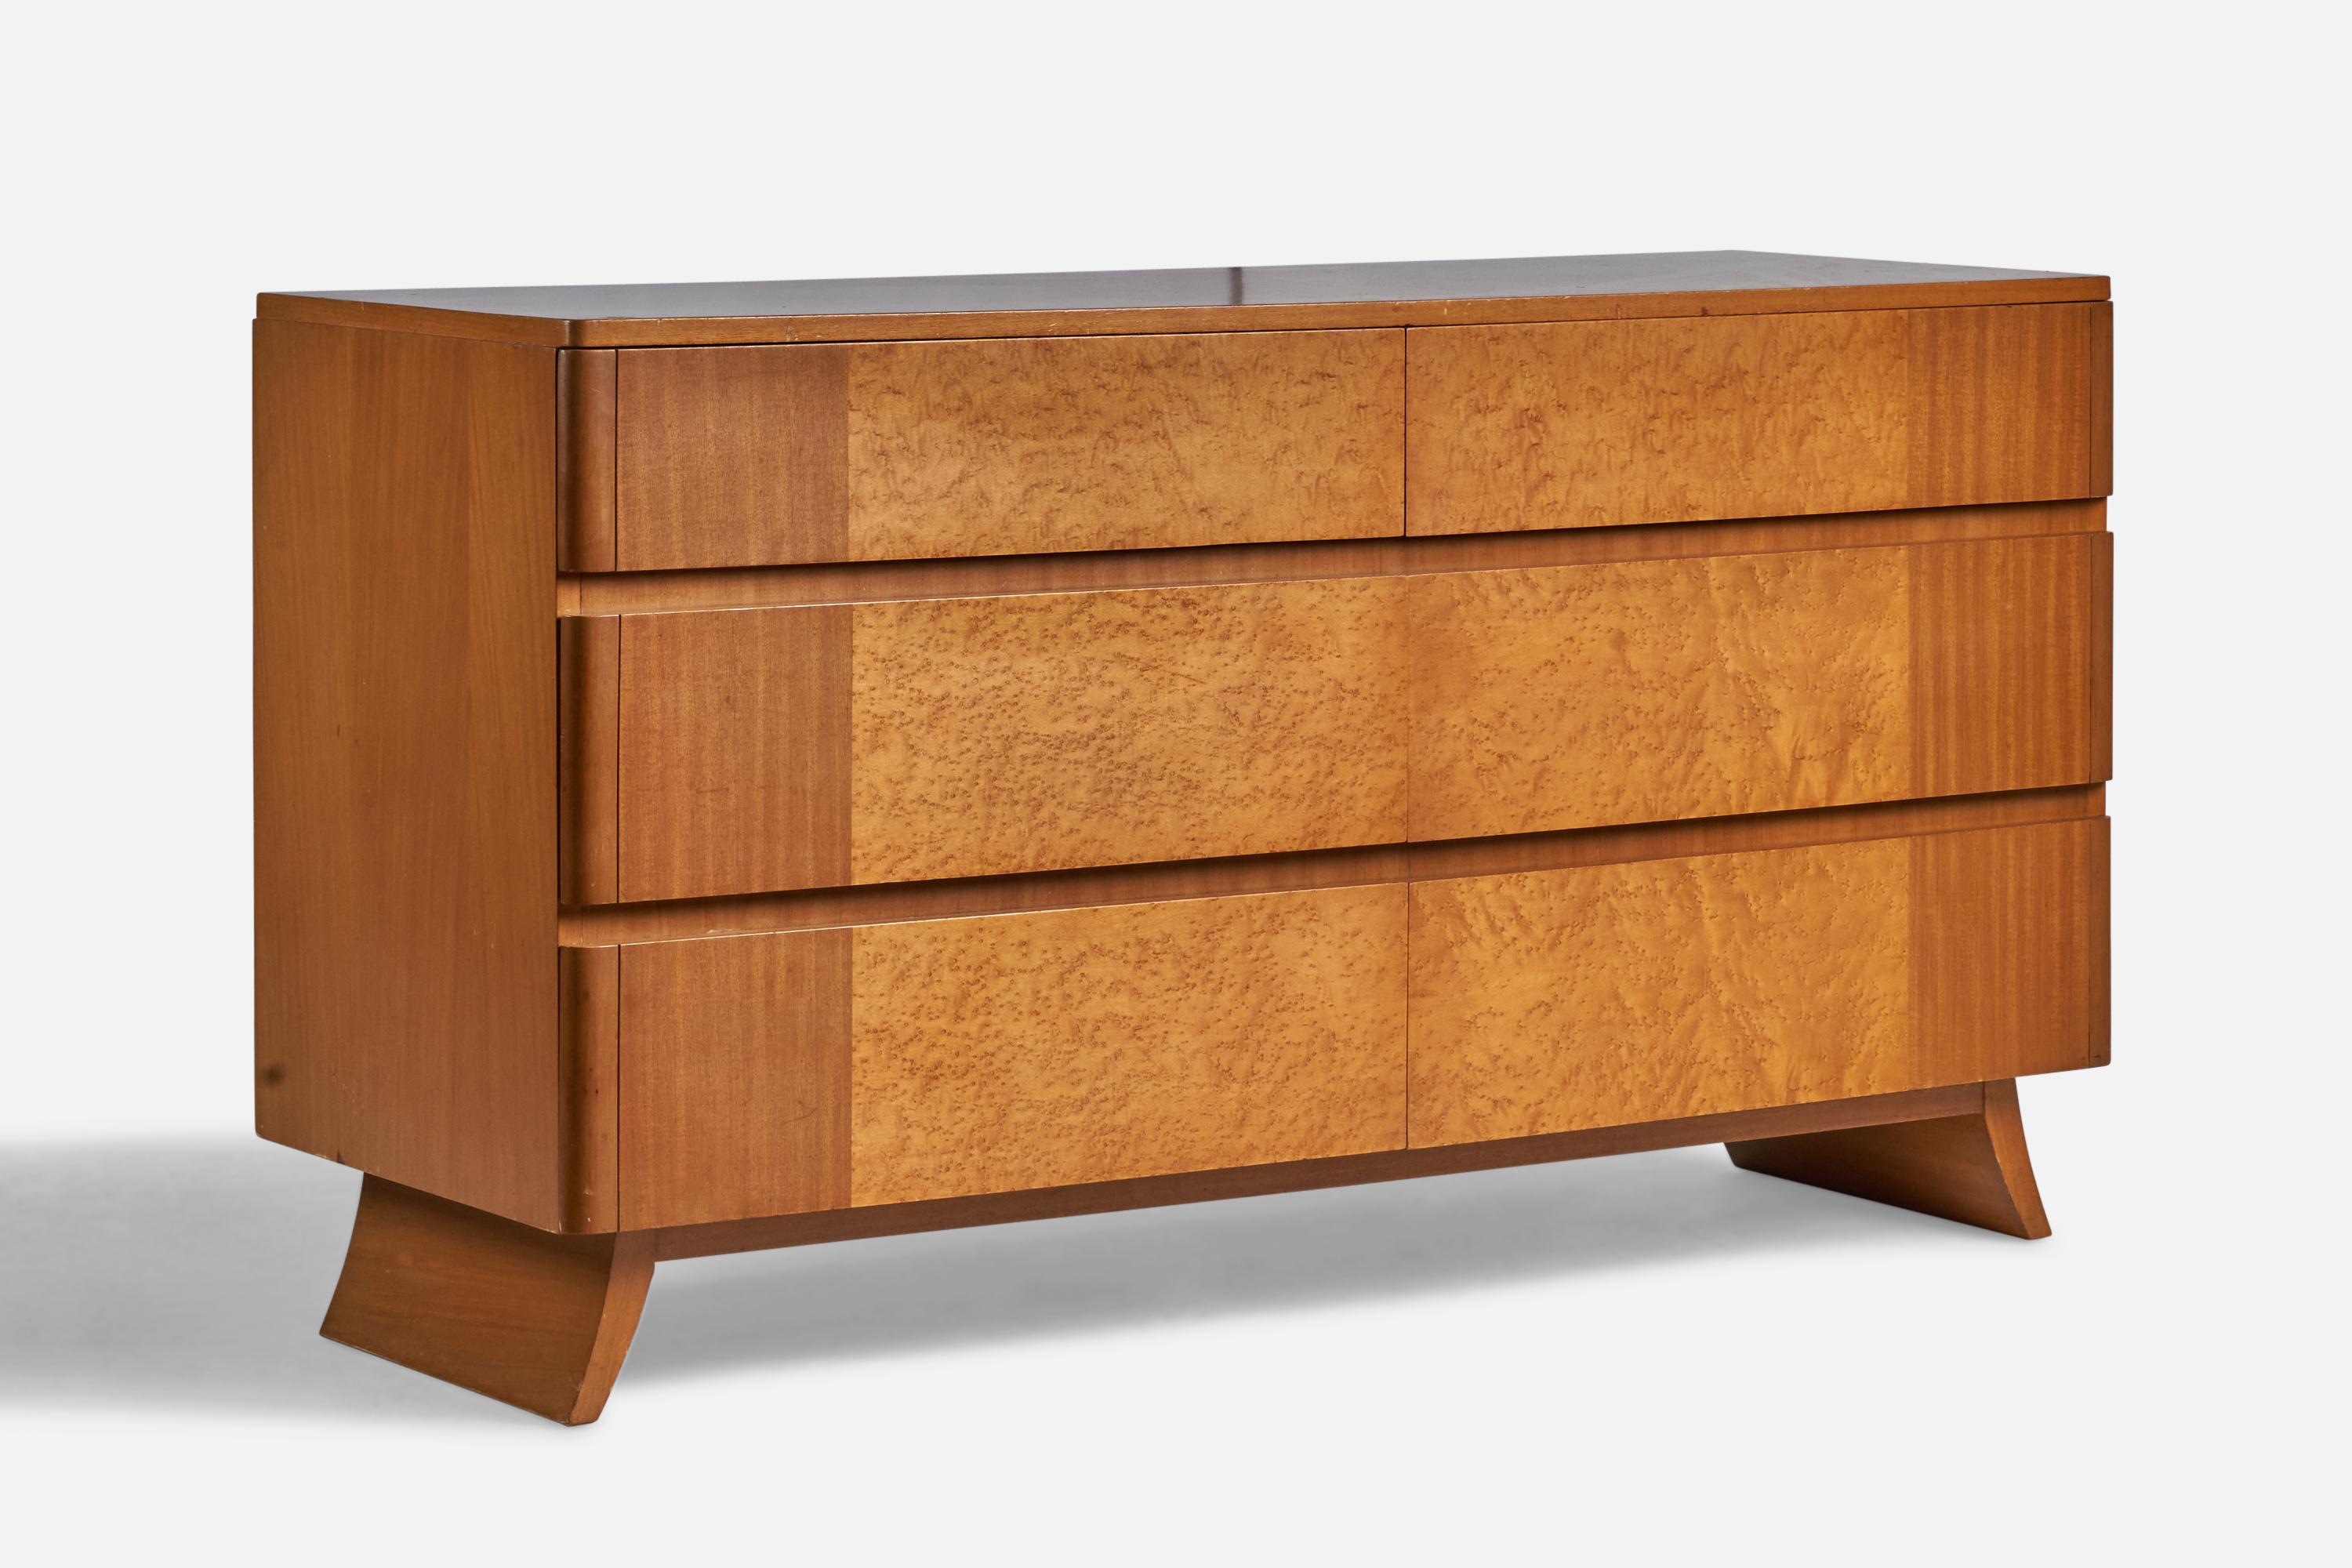 A mahogany and birch chest of drawers designed by Eliel Saarinen and produced by Rway, USA, 1940s.